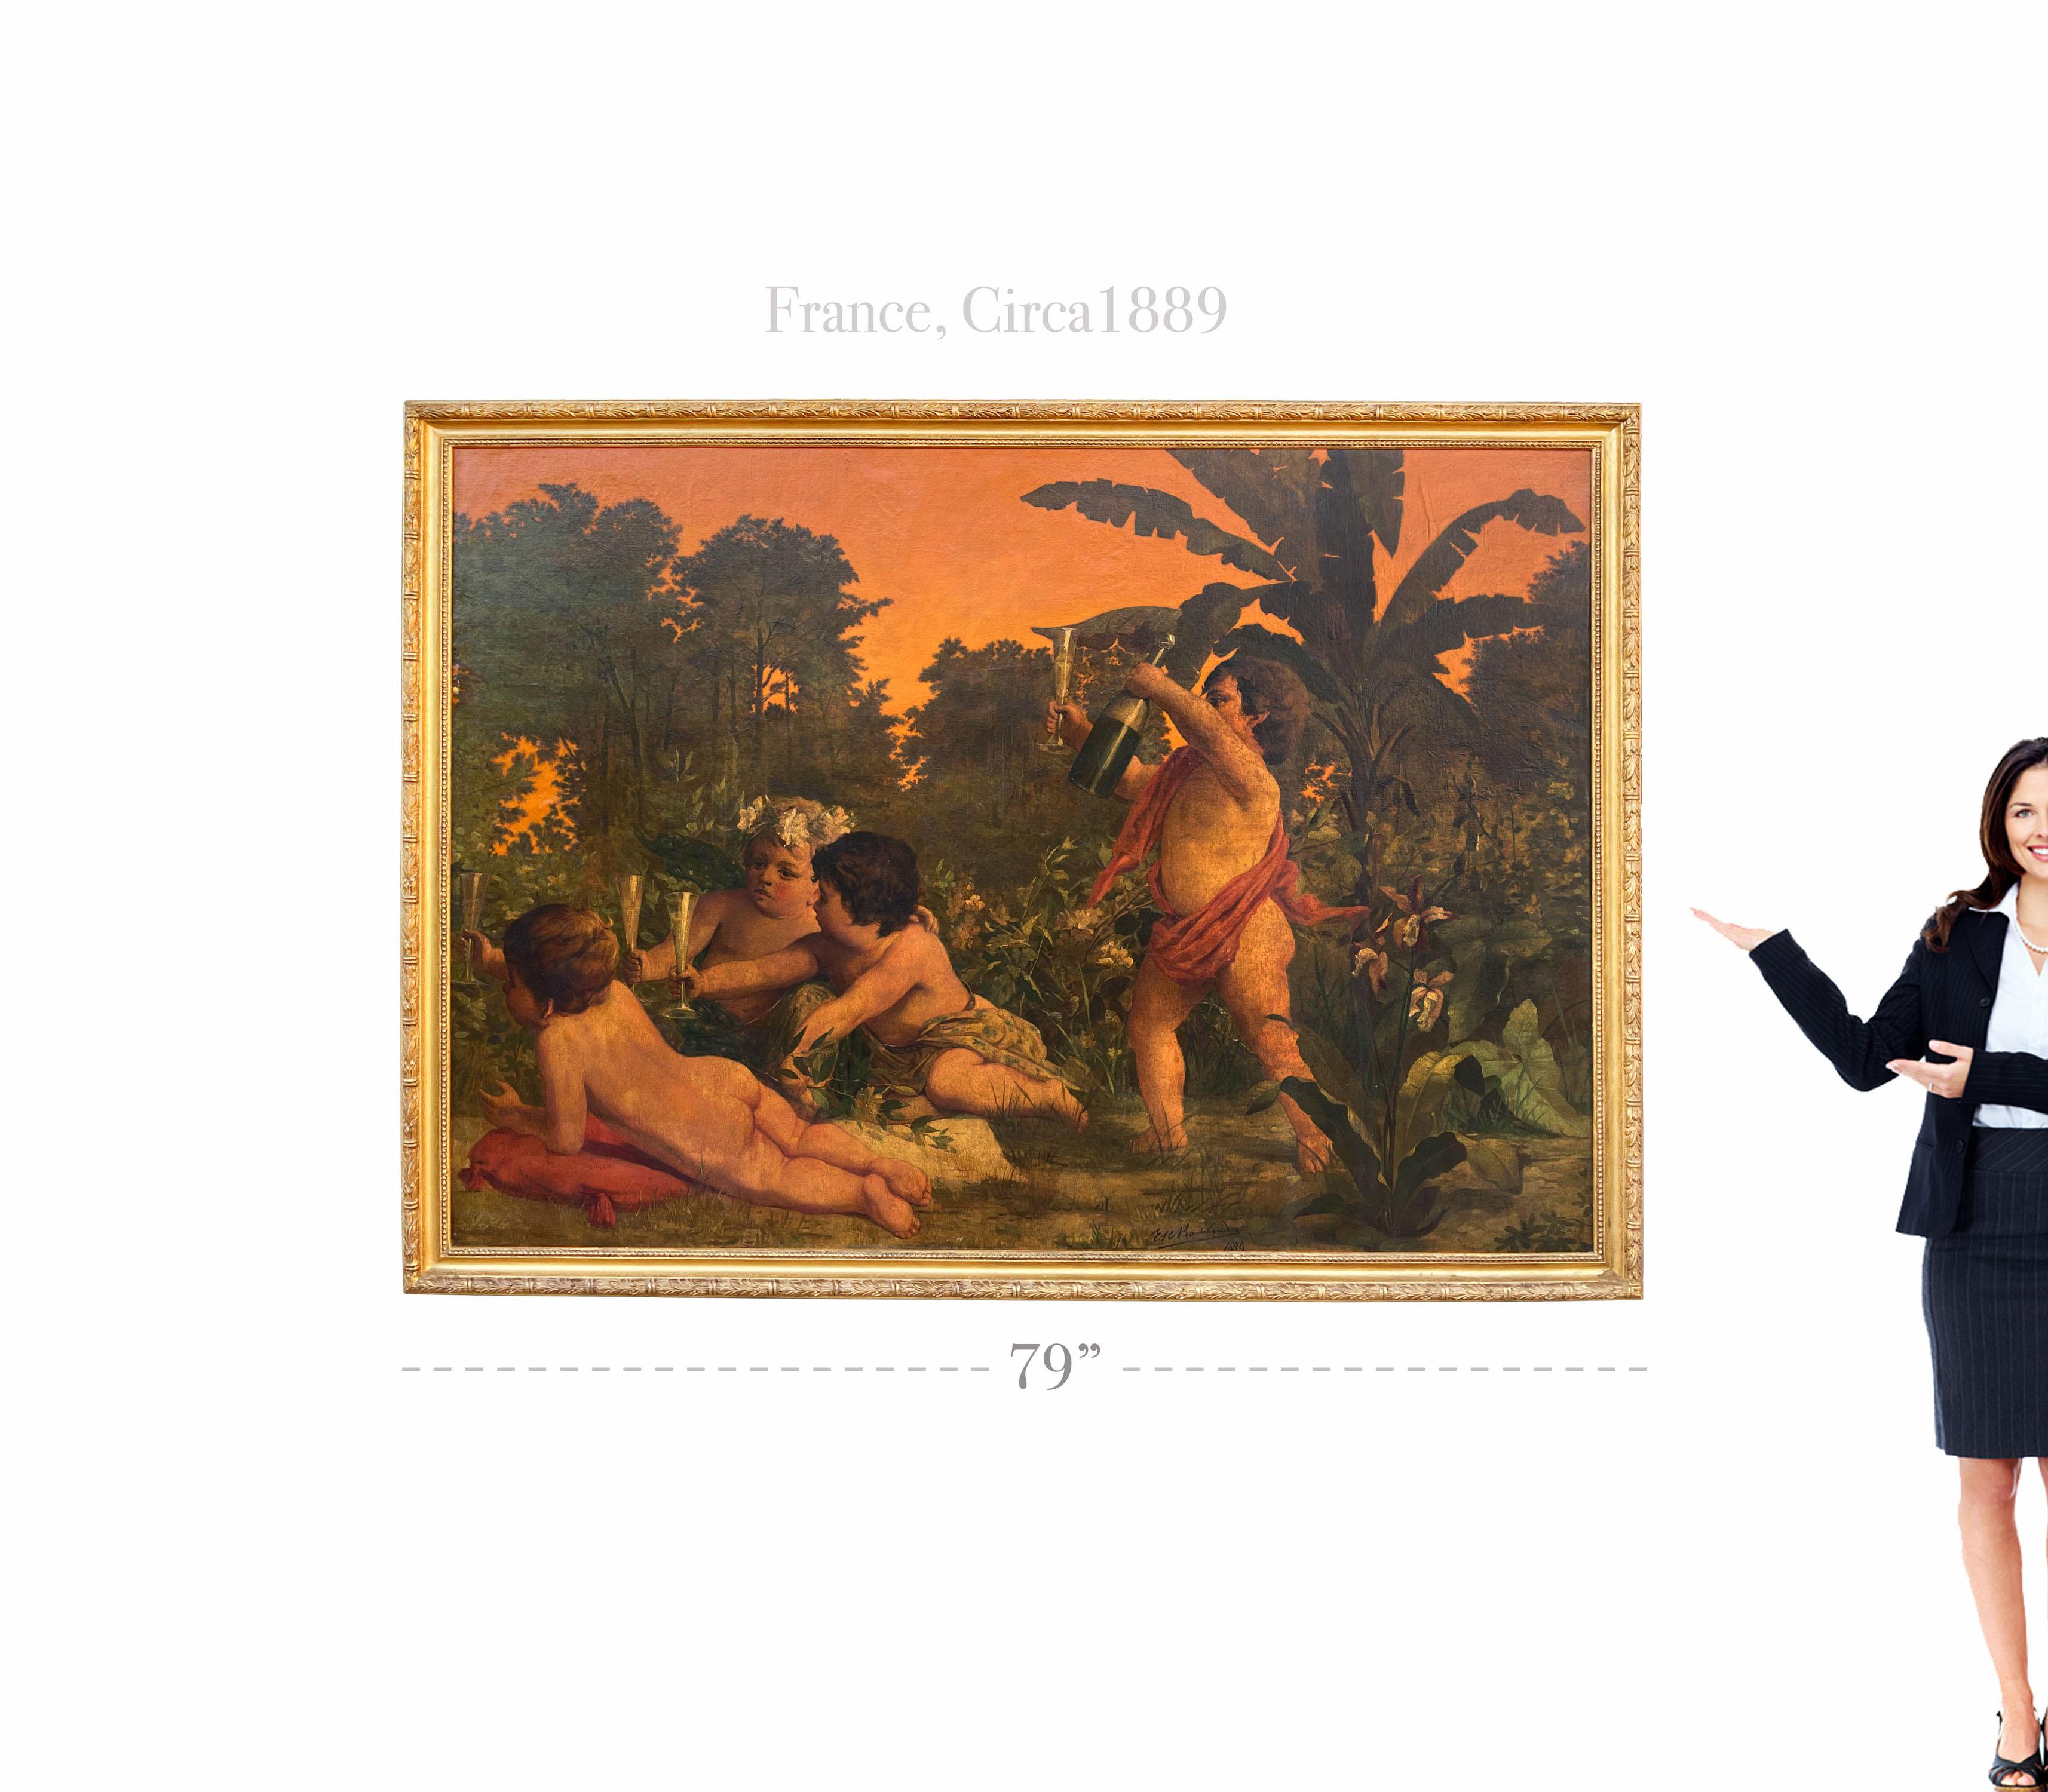 French oil on canvas painting of cupids signed and dated 1889.

Frame: 79” X 57”
Painting: 73” X 53”.